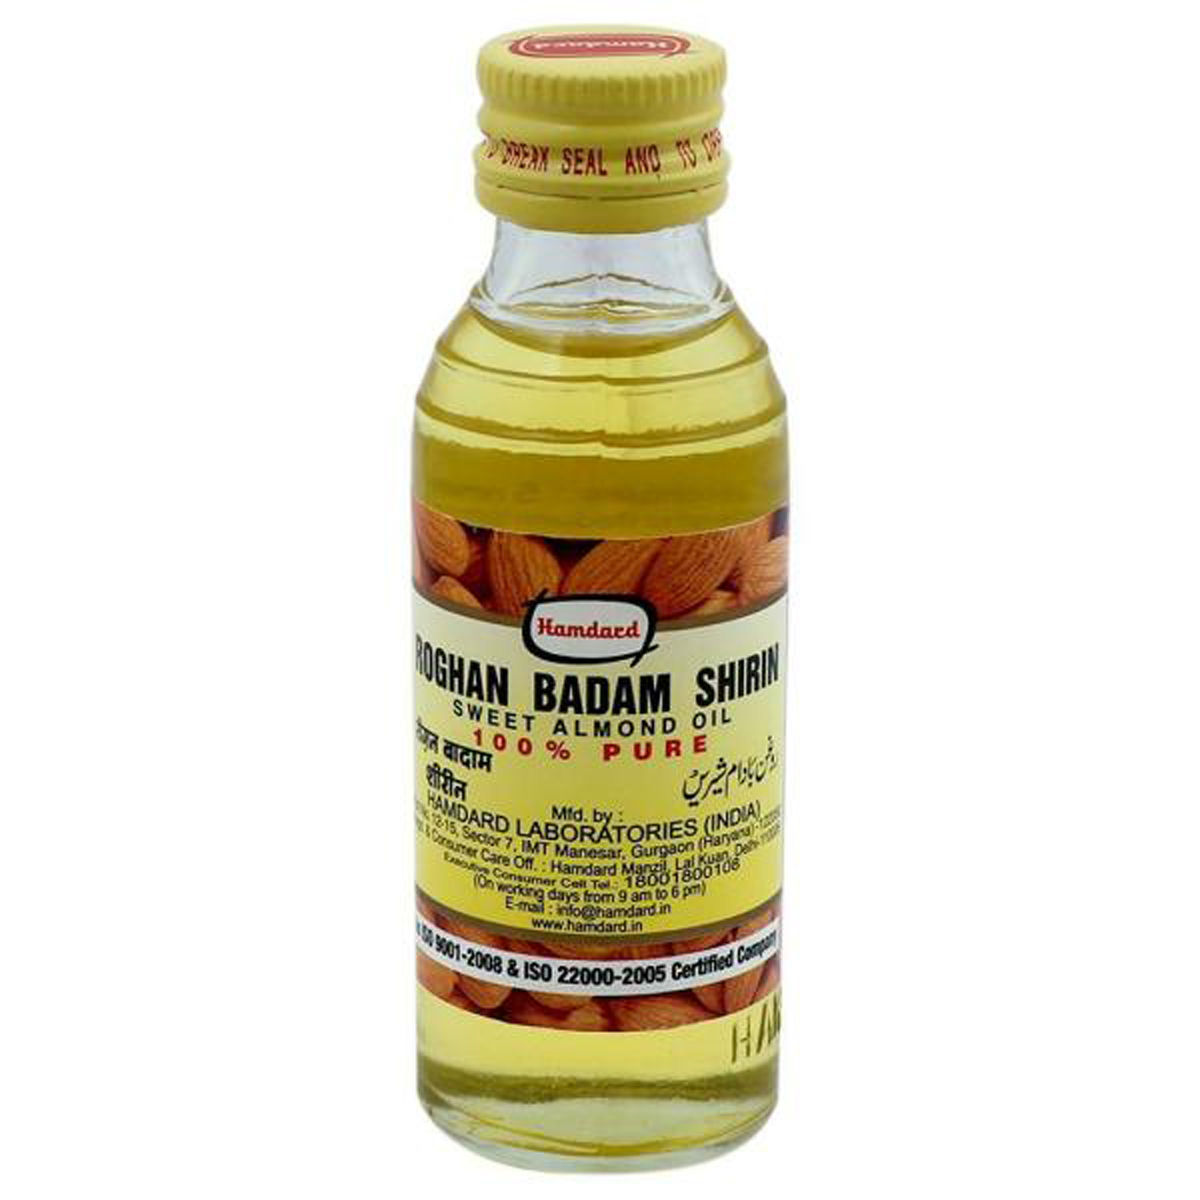 TNW The Natural Wash Pure Almond Oil Badam Rogan for Glowing Face  Body  and Healthy Hair Buy TNW The Natural Wash Pure Almond Oil Badam Rogan for  Glowing Face  Body